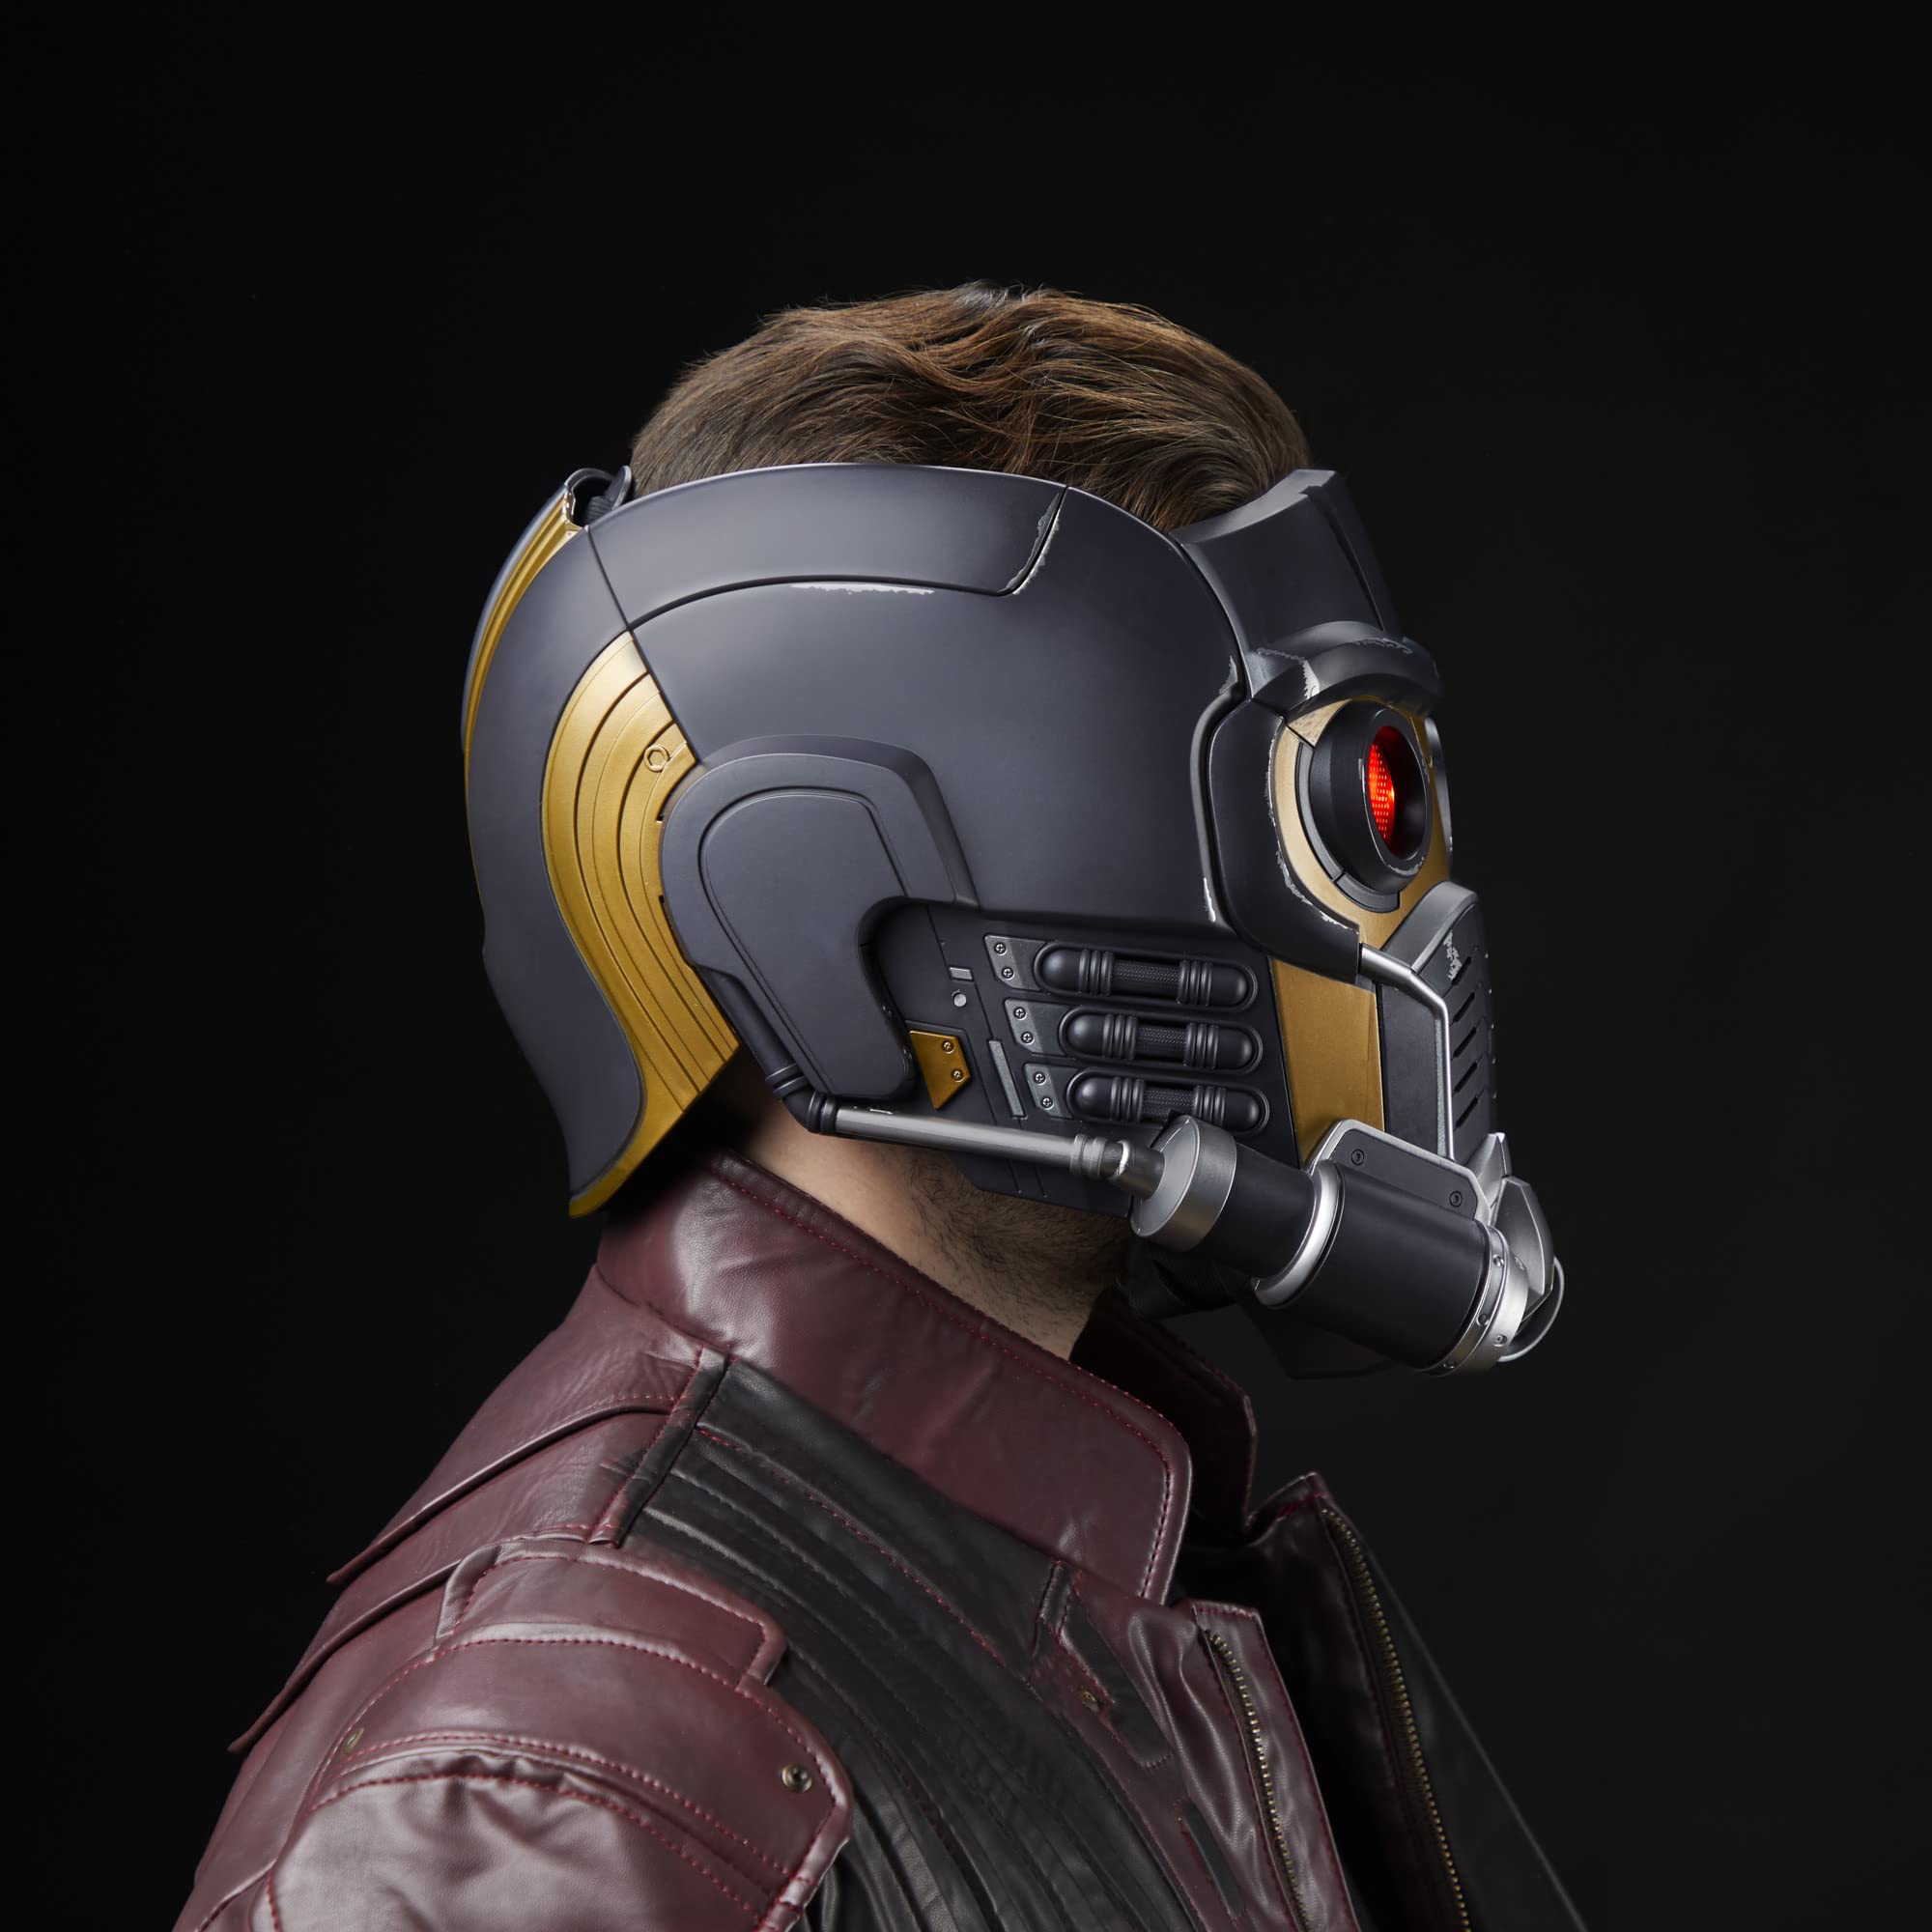 Marvel Legends Series Star-Lord Premium Electronic Roleplay Helmet with Light and Sound FX, Guardians of The Galaxy Adult Roleplay Gear